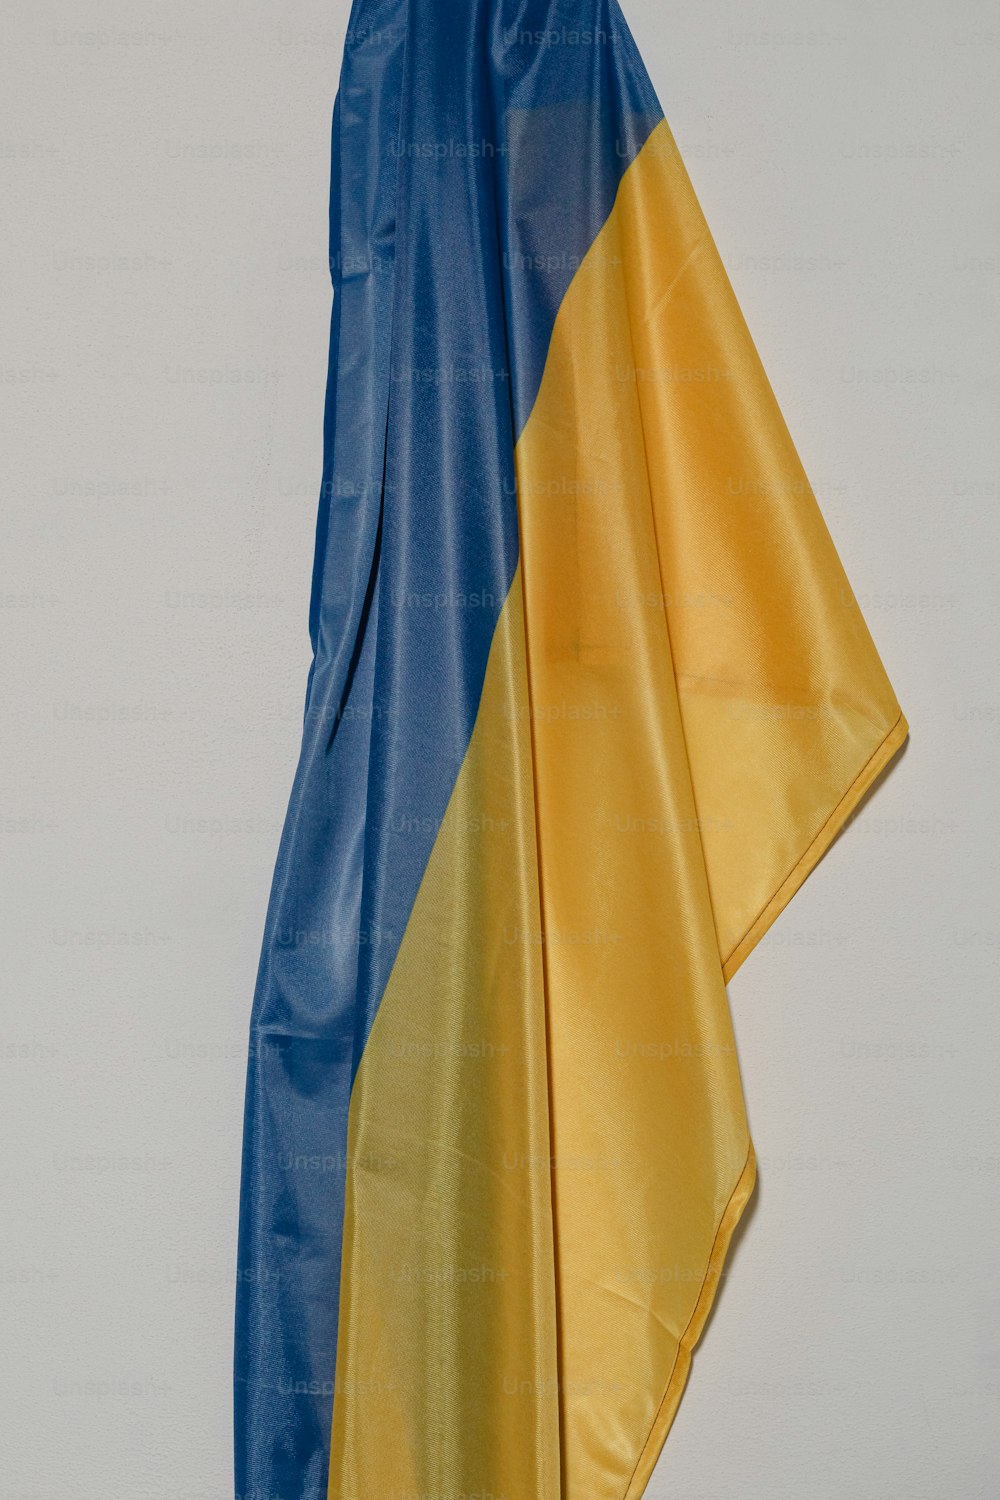 a blue and yellow flag hanging on a wall